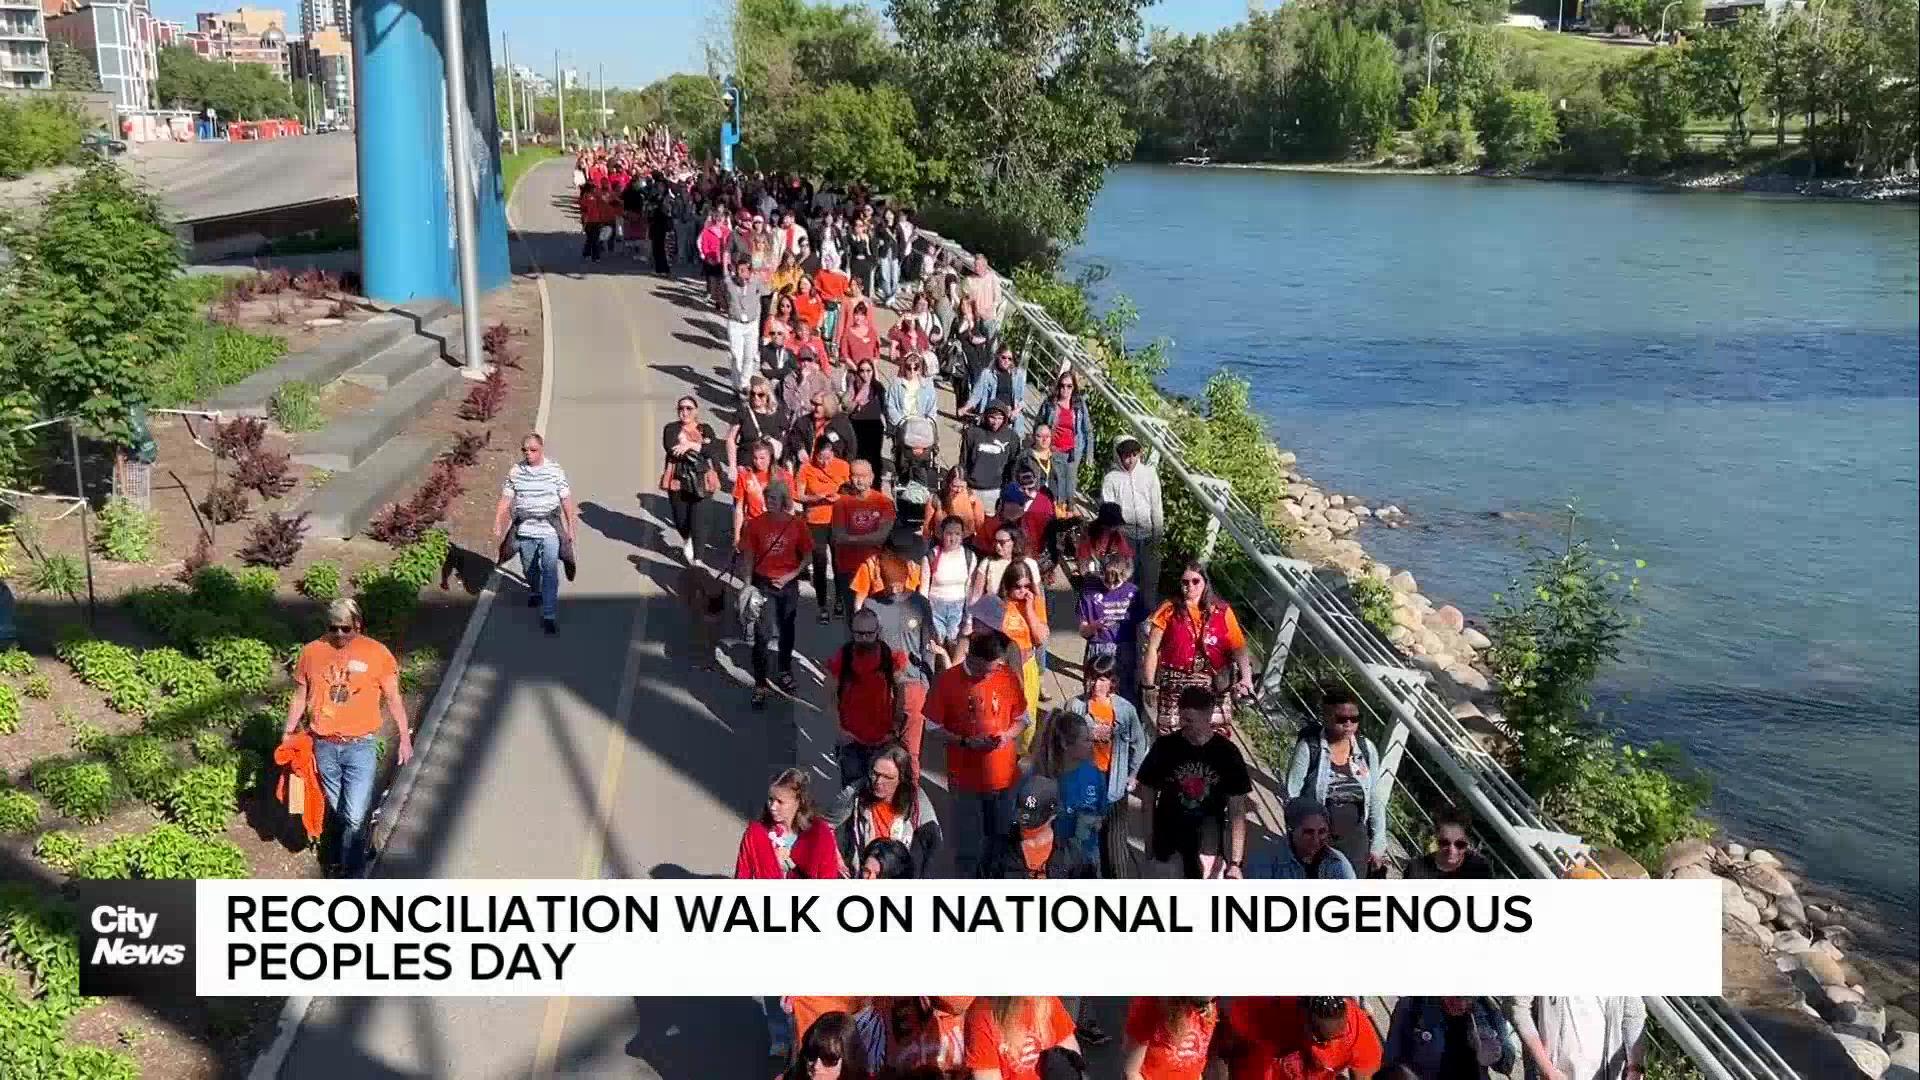 Reconciliation walk on National Indigenous Peoples Day